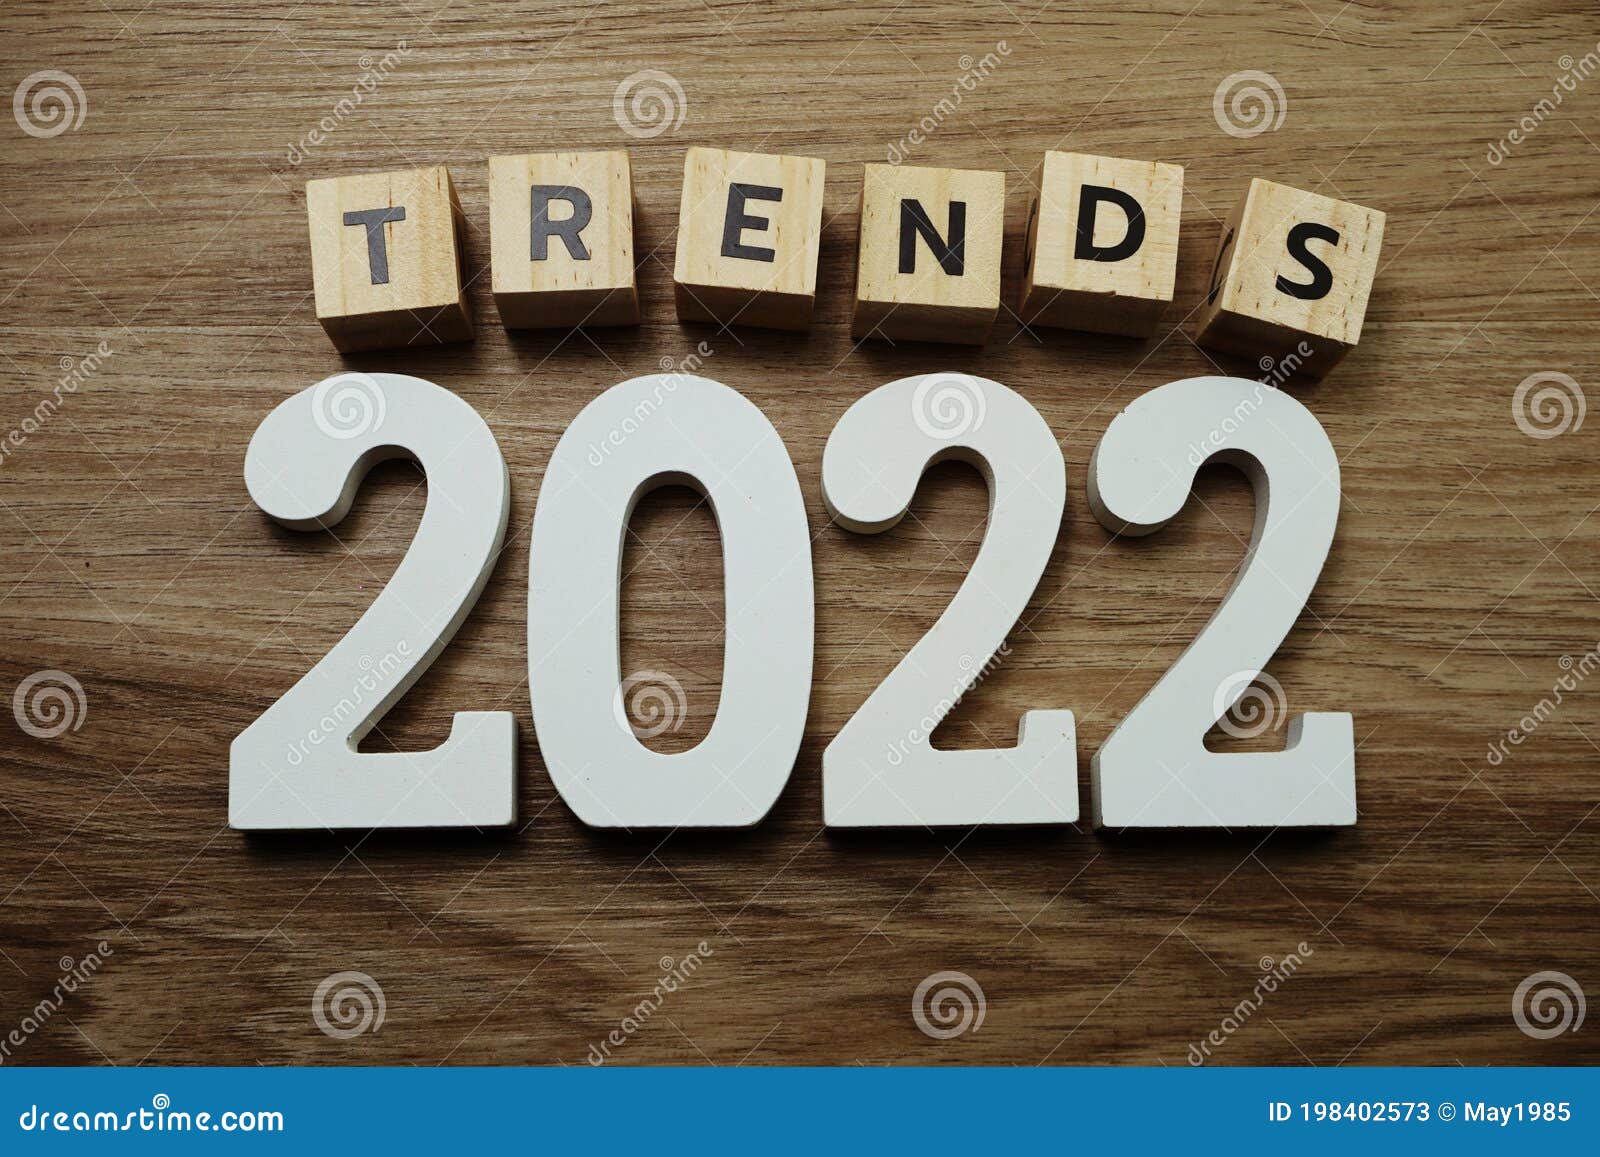 trends 2022 word alphabet letters on wooden background